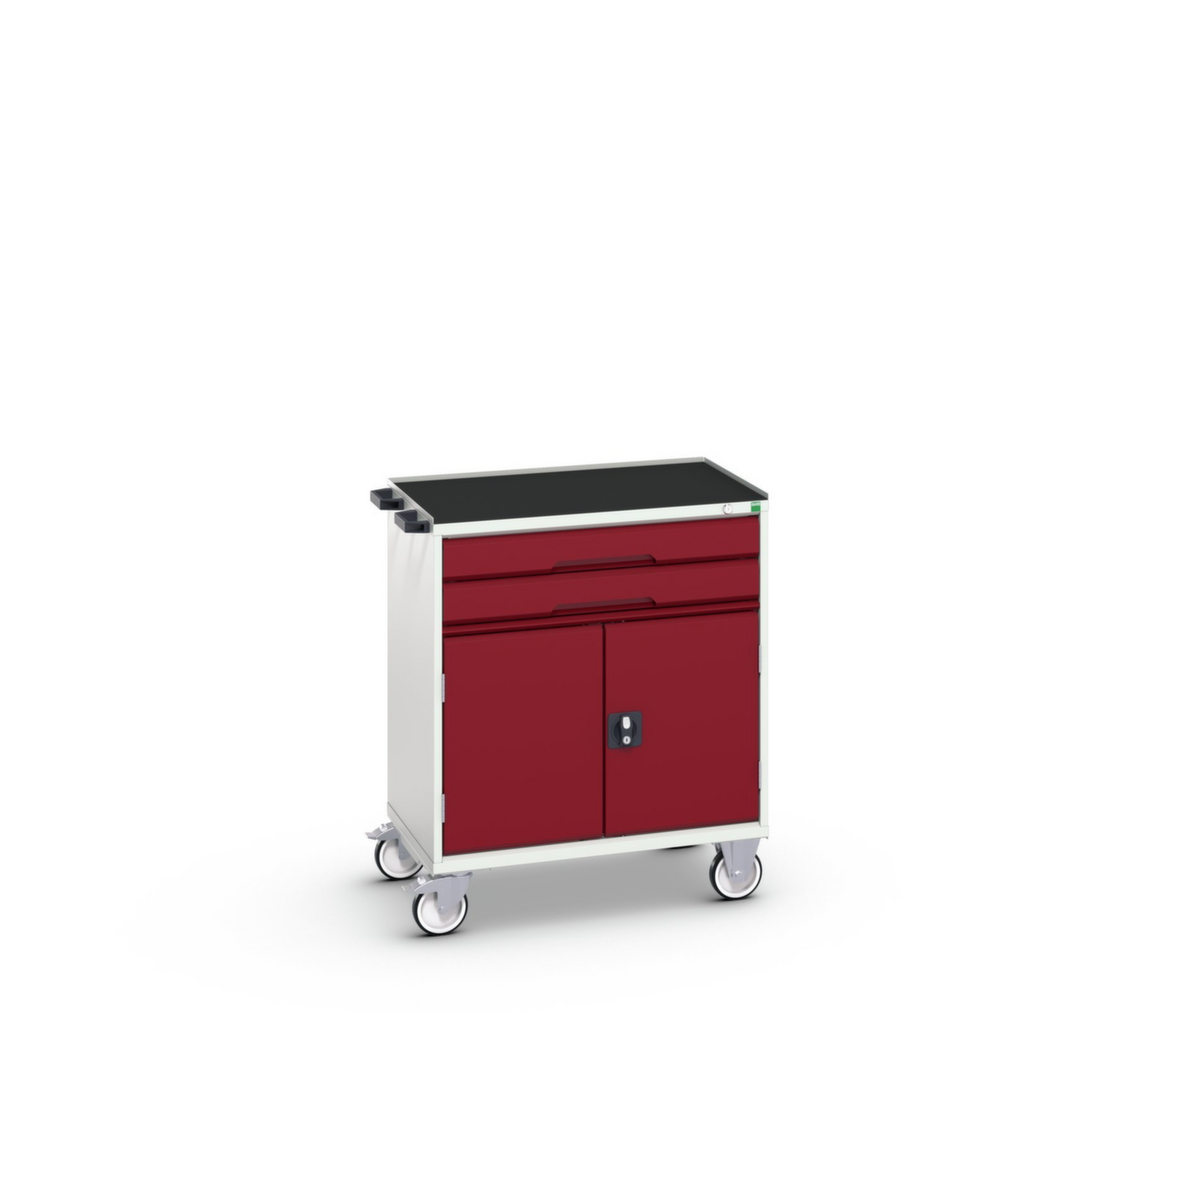 bott Chariot à outils verso, 2 tiroirs, 1 armoire, RAL7035 gris clair/RAL3004 rouge pourpre  ZOOM